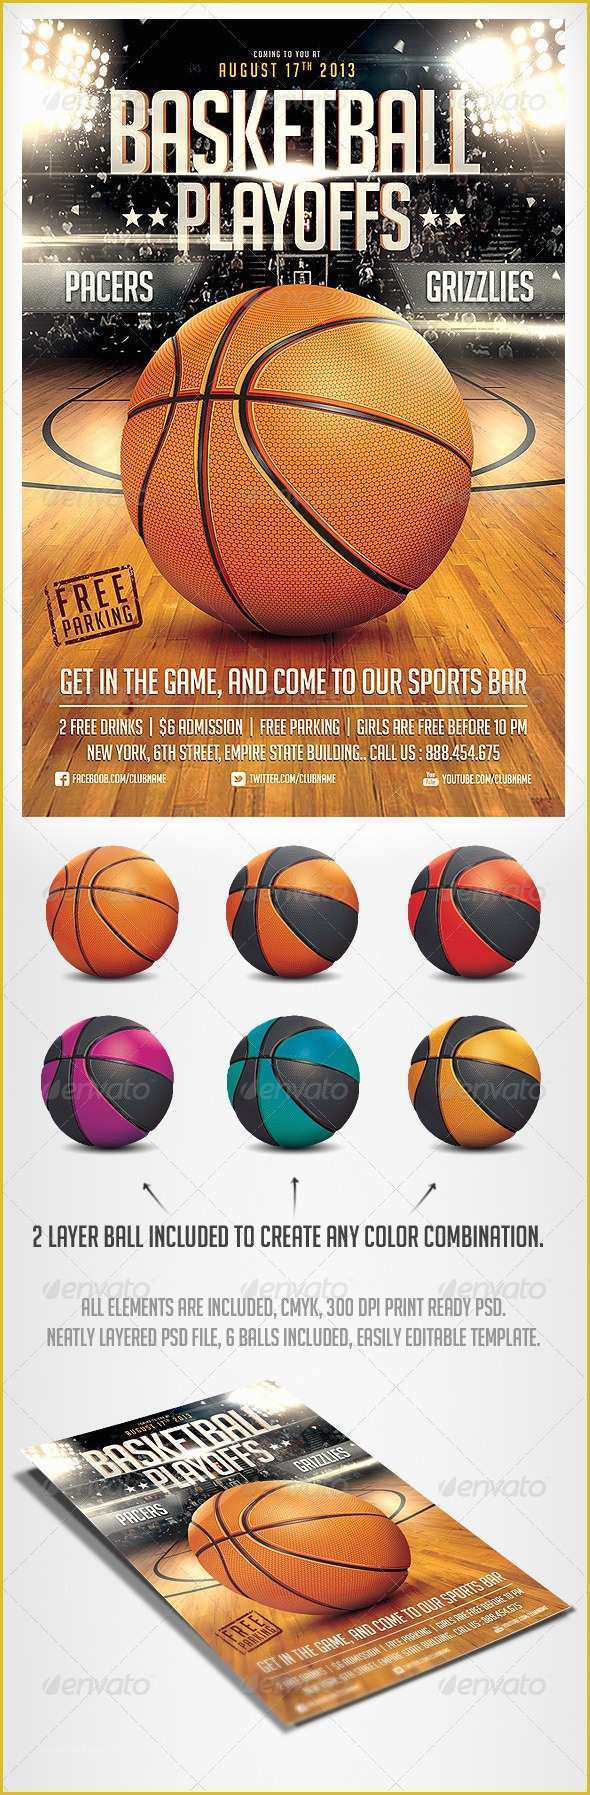 Sports event Flyer Template Free Of Basketball Game Flyer Psd Template Sports events